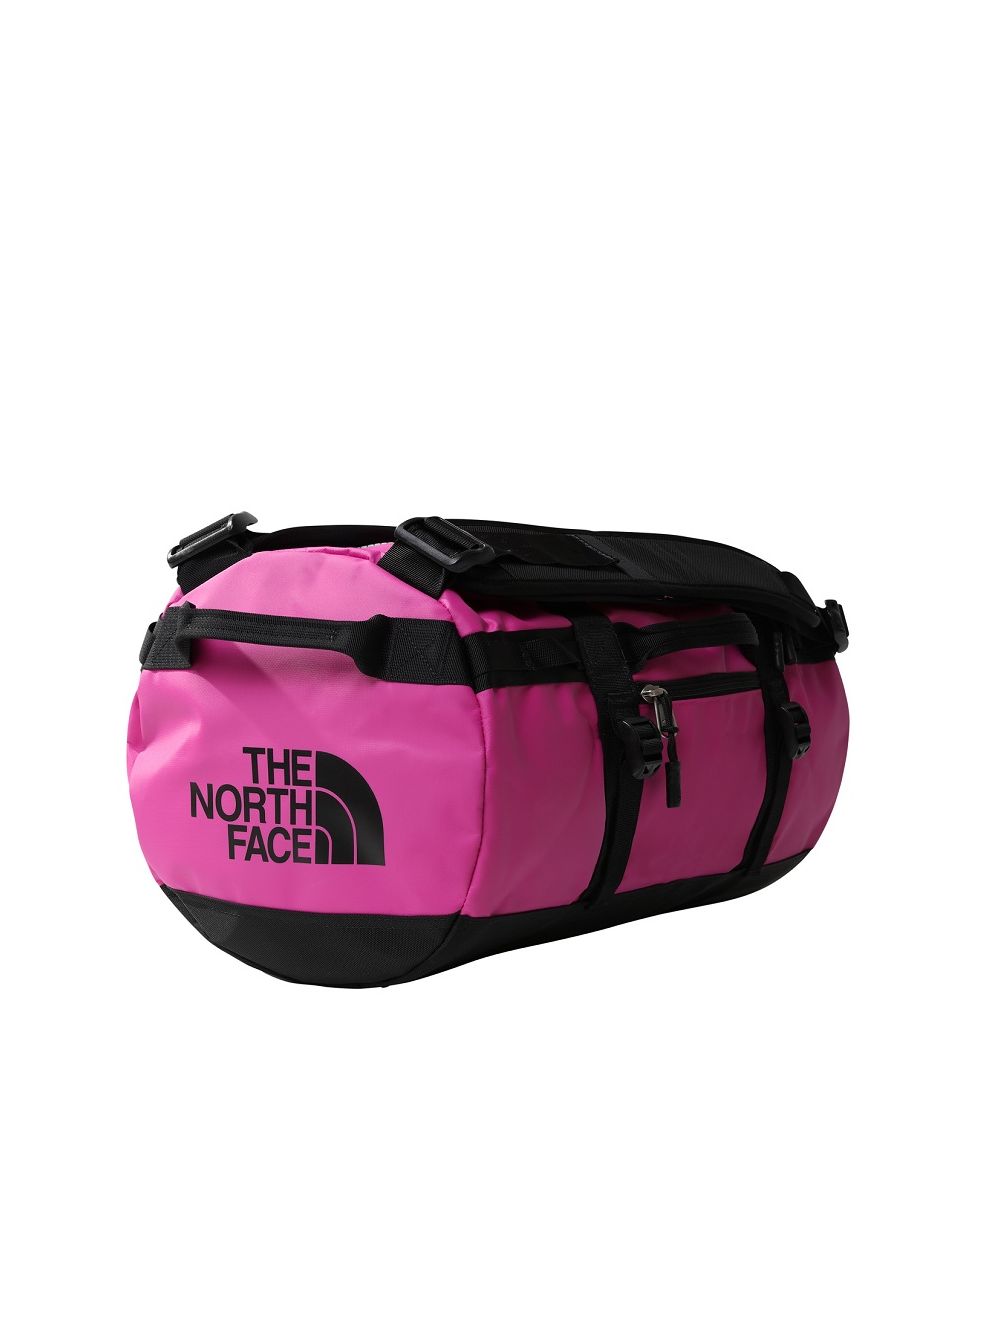 dempen commando vogel The North Face Base Camp Duffel XS | Duurzame tas van gerecycled materiaal